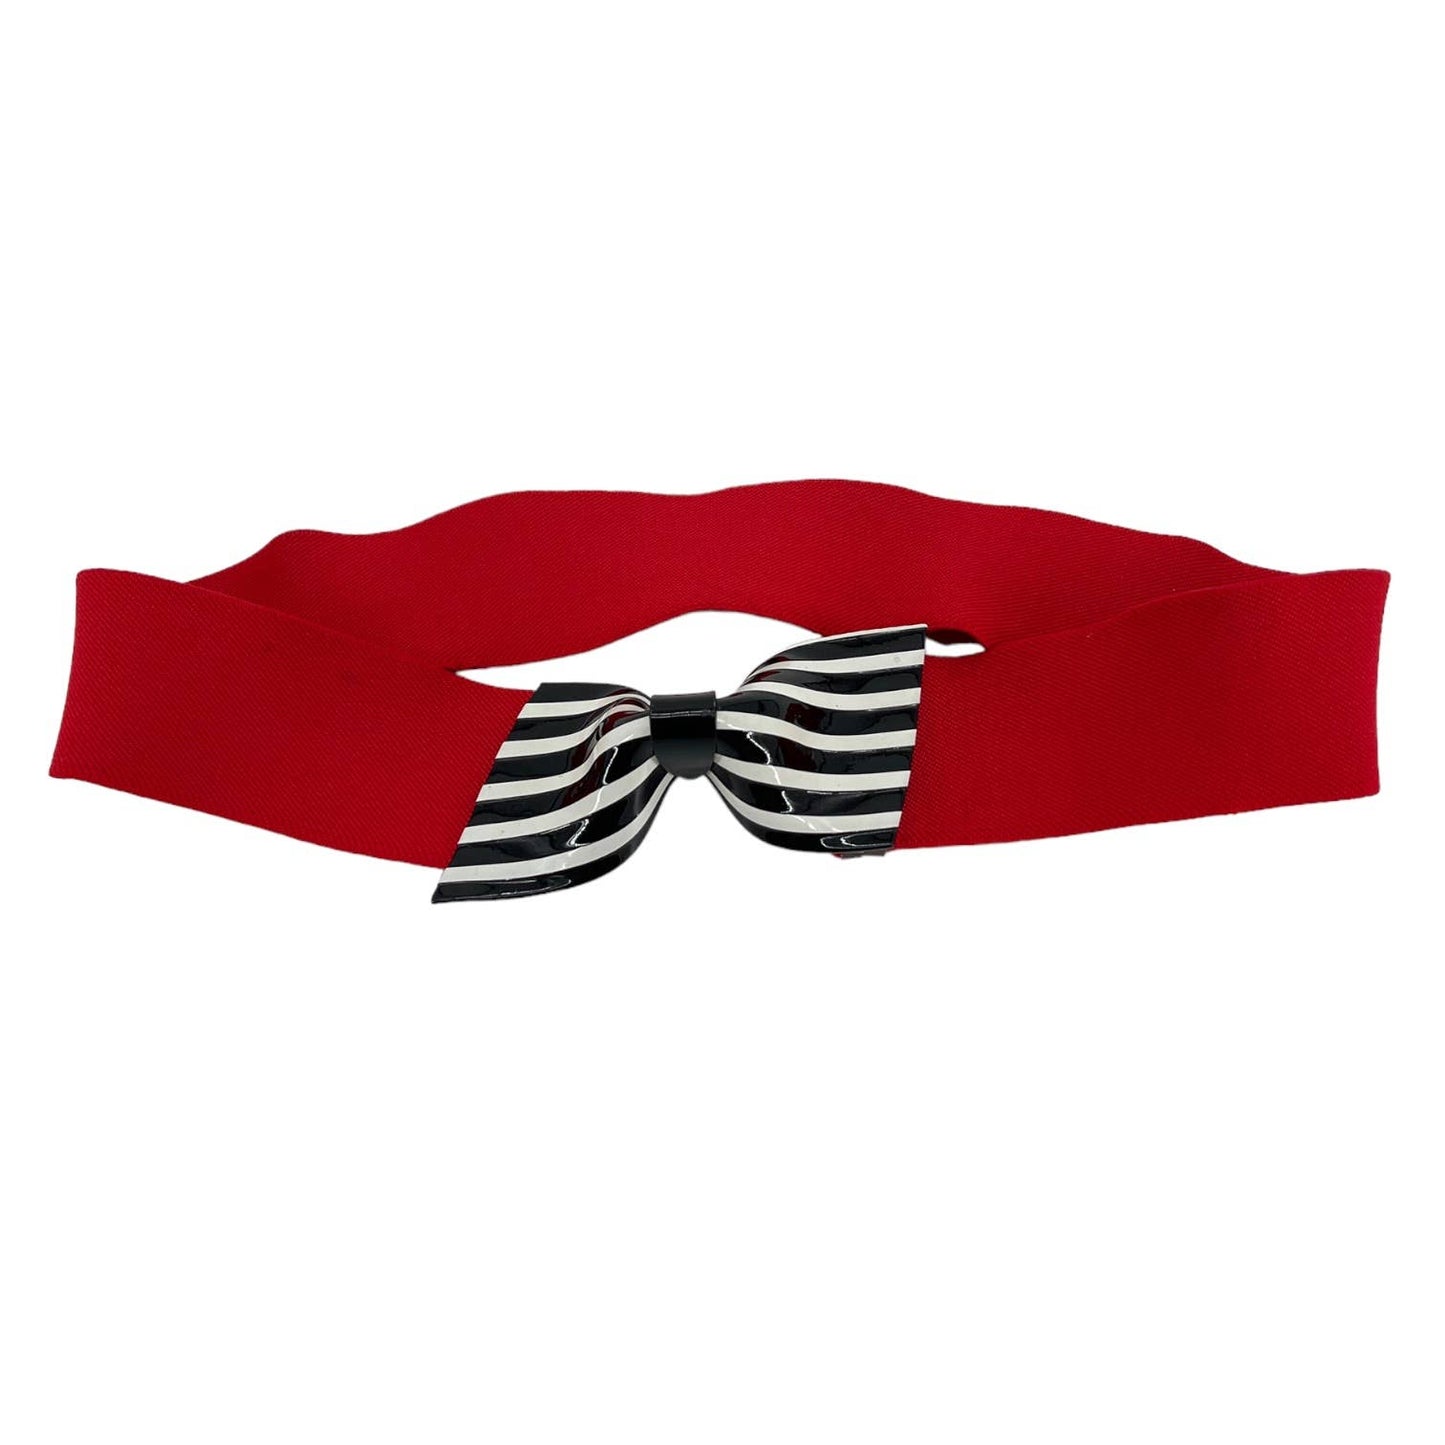 Vintage 80s Red Elastic Belt with Black and White Stripe Bow Molded Plastic M L